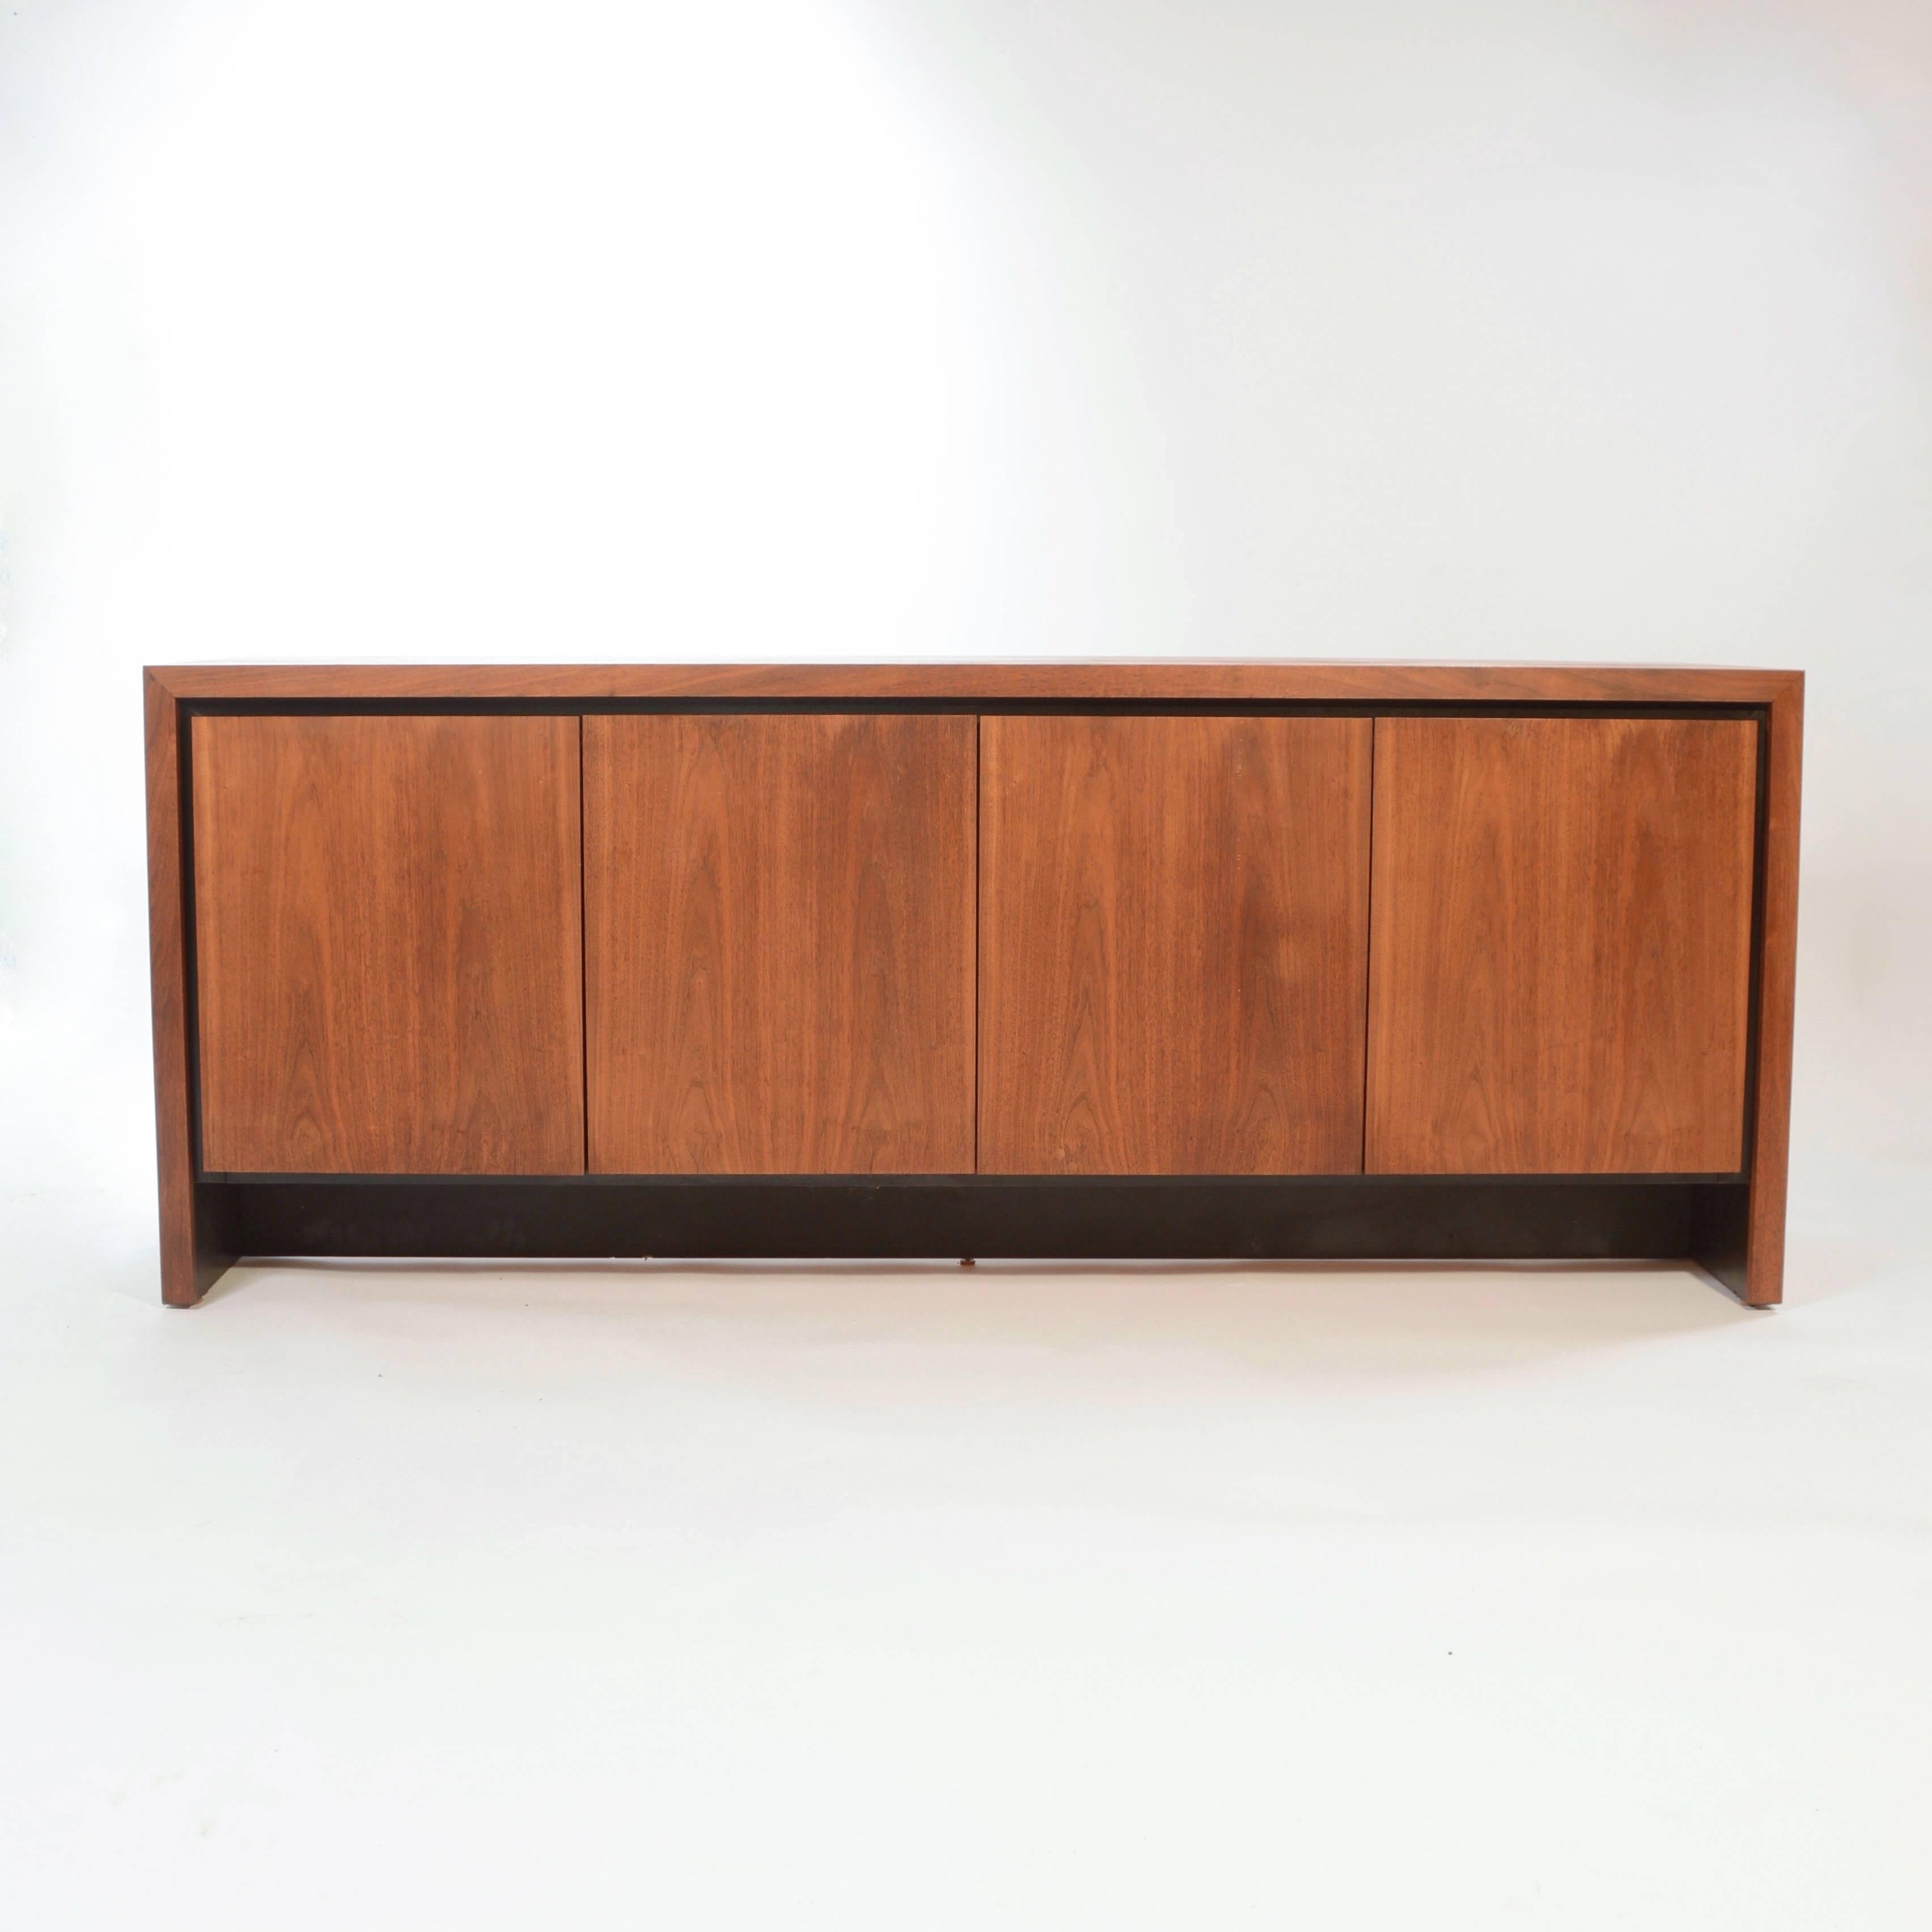 This is a great modern credenza by Tomlinson Furniture of North Carolina.